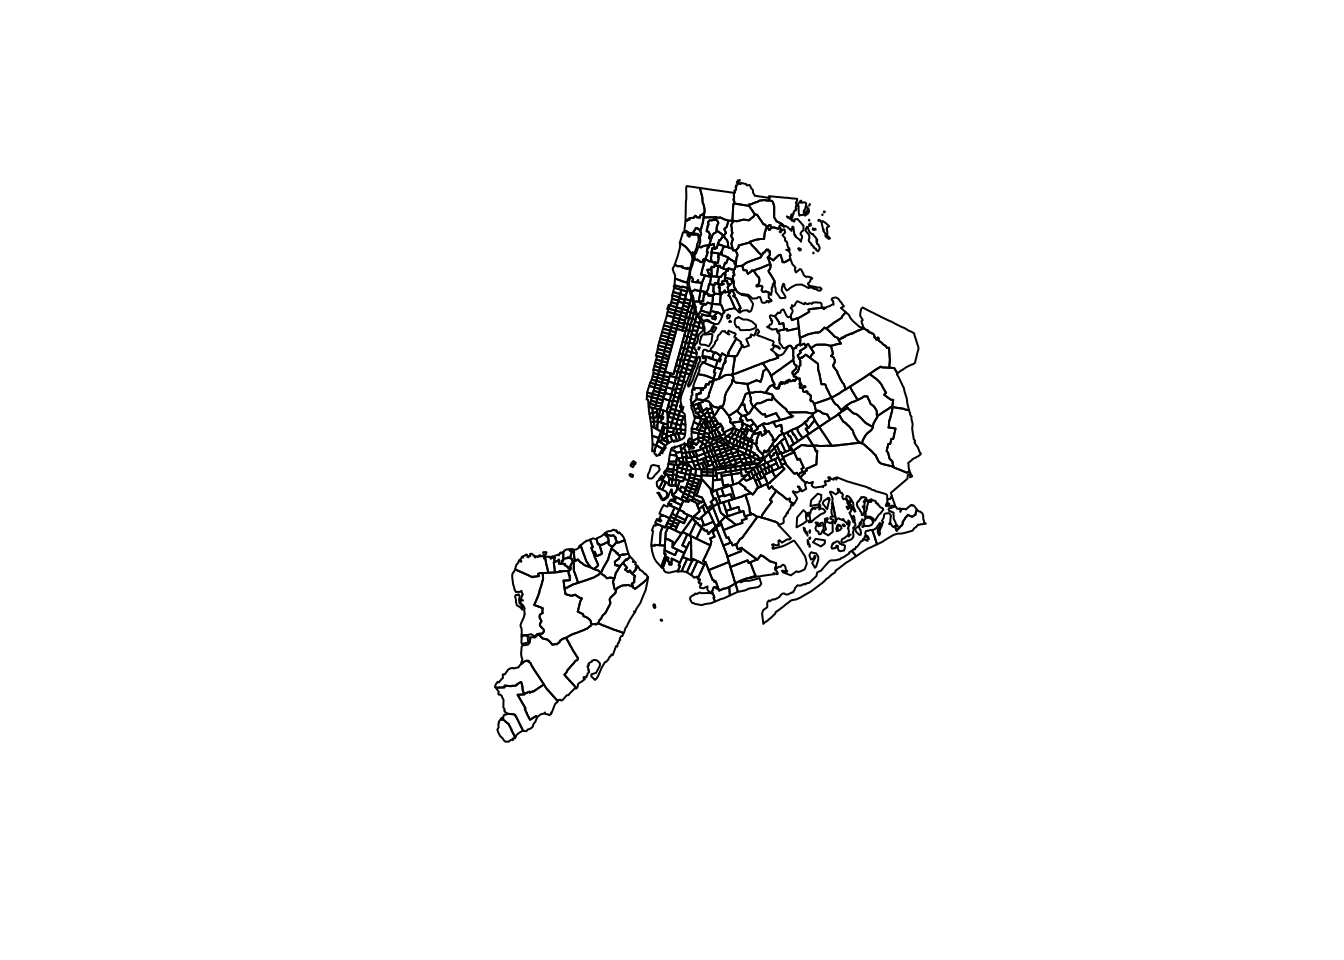 Plot of NYC Census tracts in 1910 using an Albers Equal Area CRS